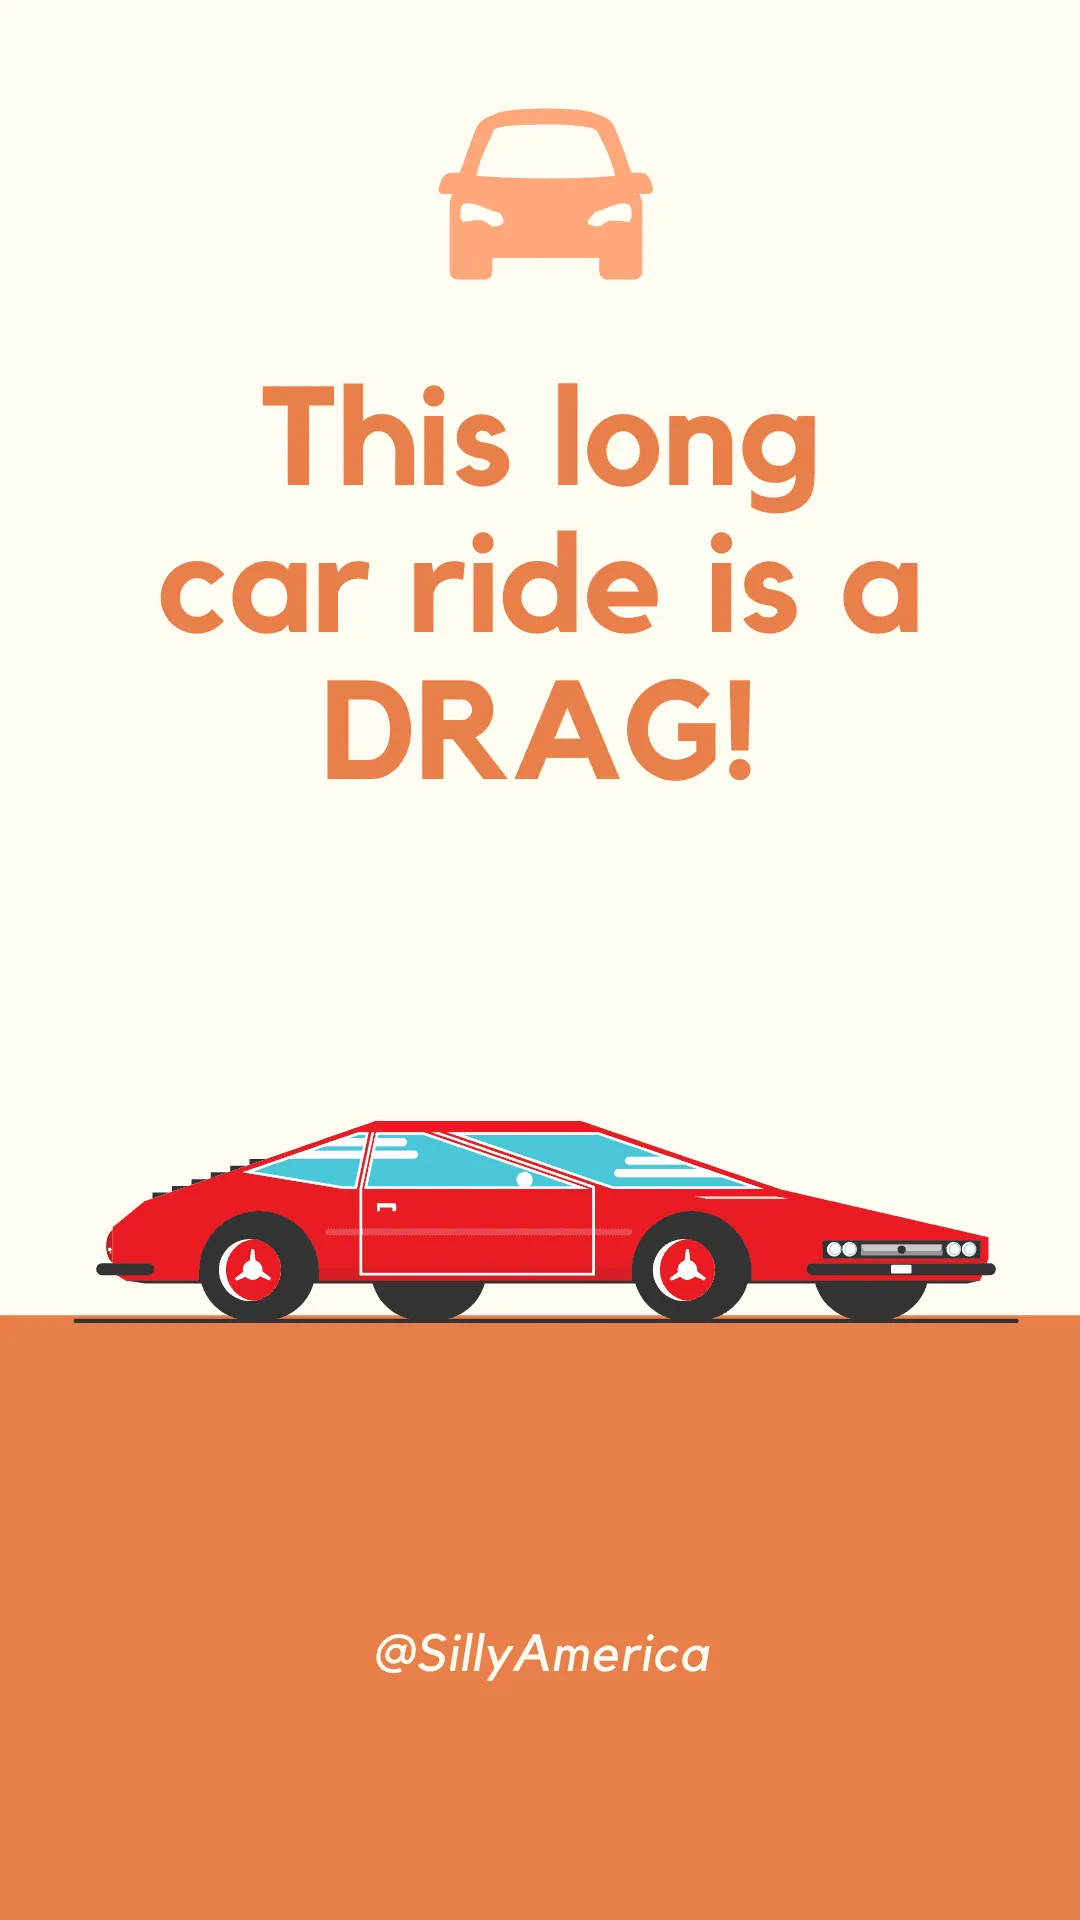 This long car ride is a DRAG! - Car Puns to fuel your road trip content!